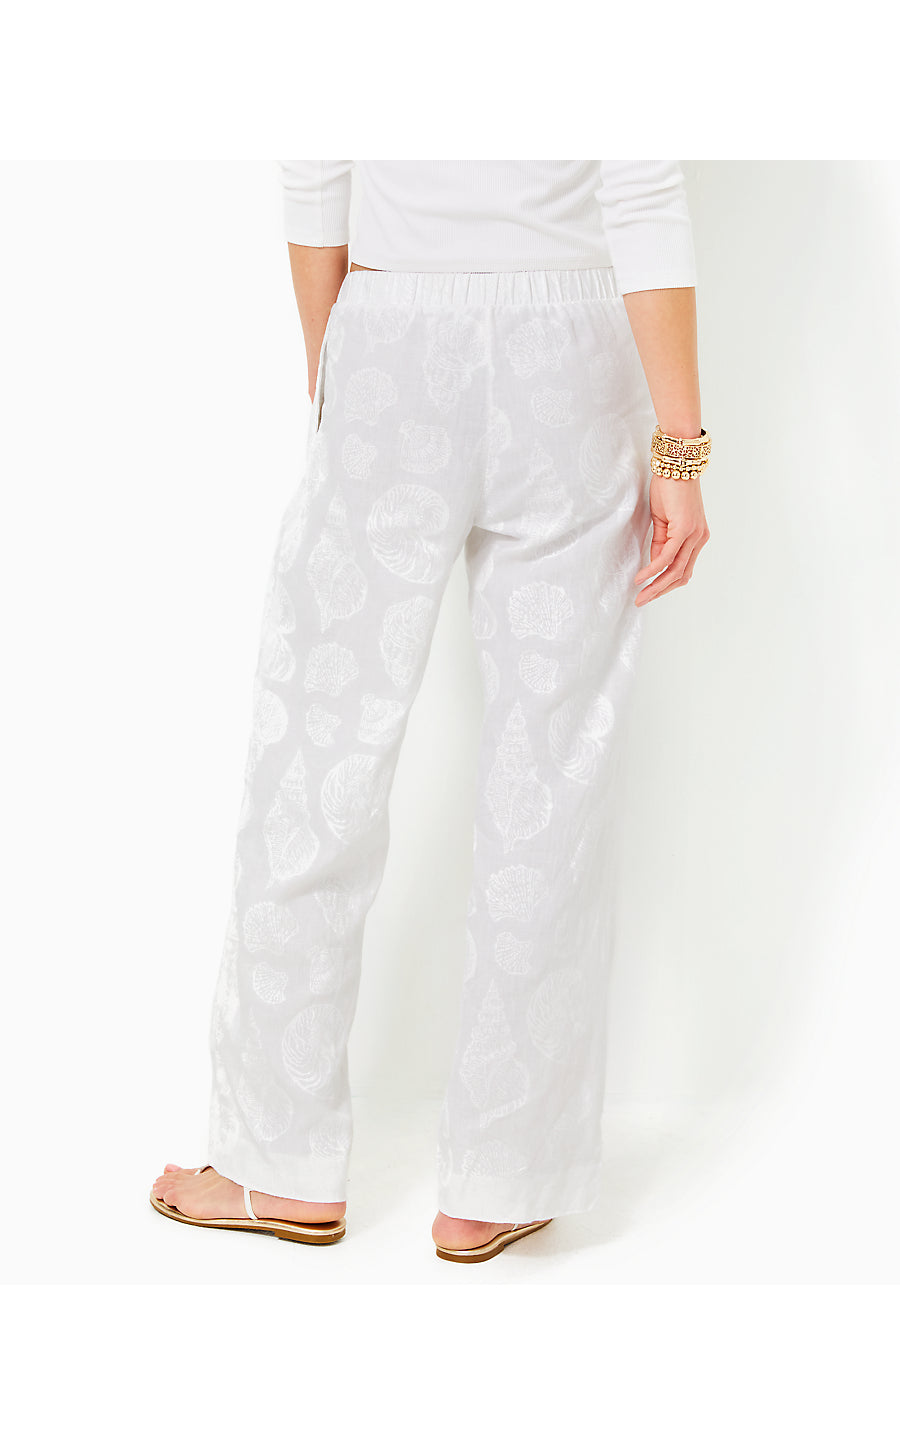 Daylen Linen Palazzo | Resort White Shell Of A Good Time